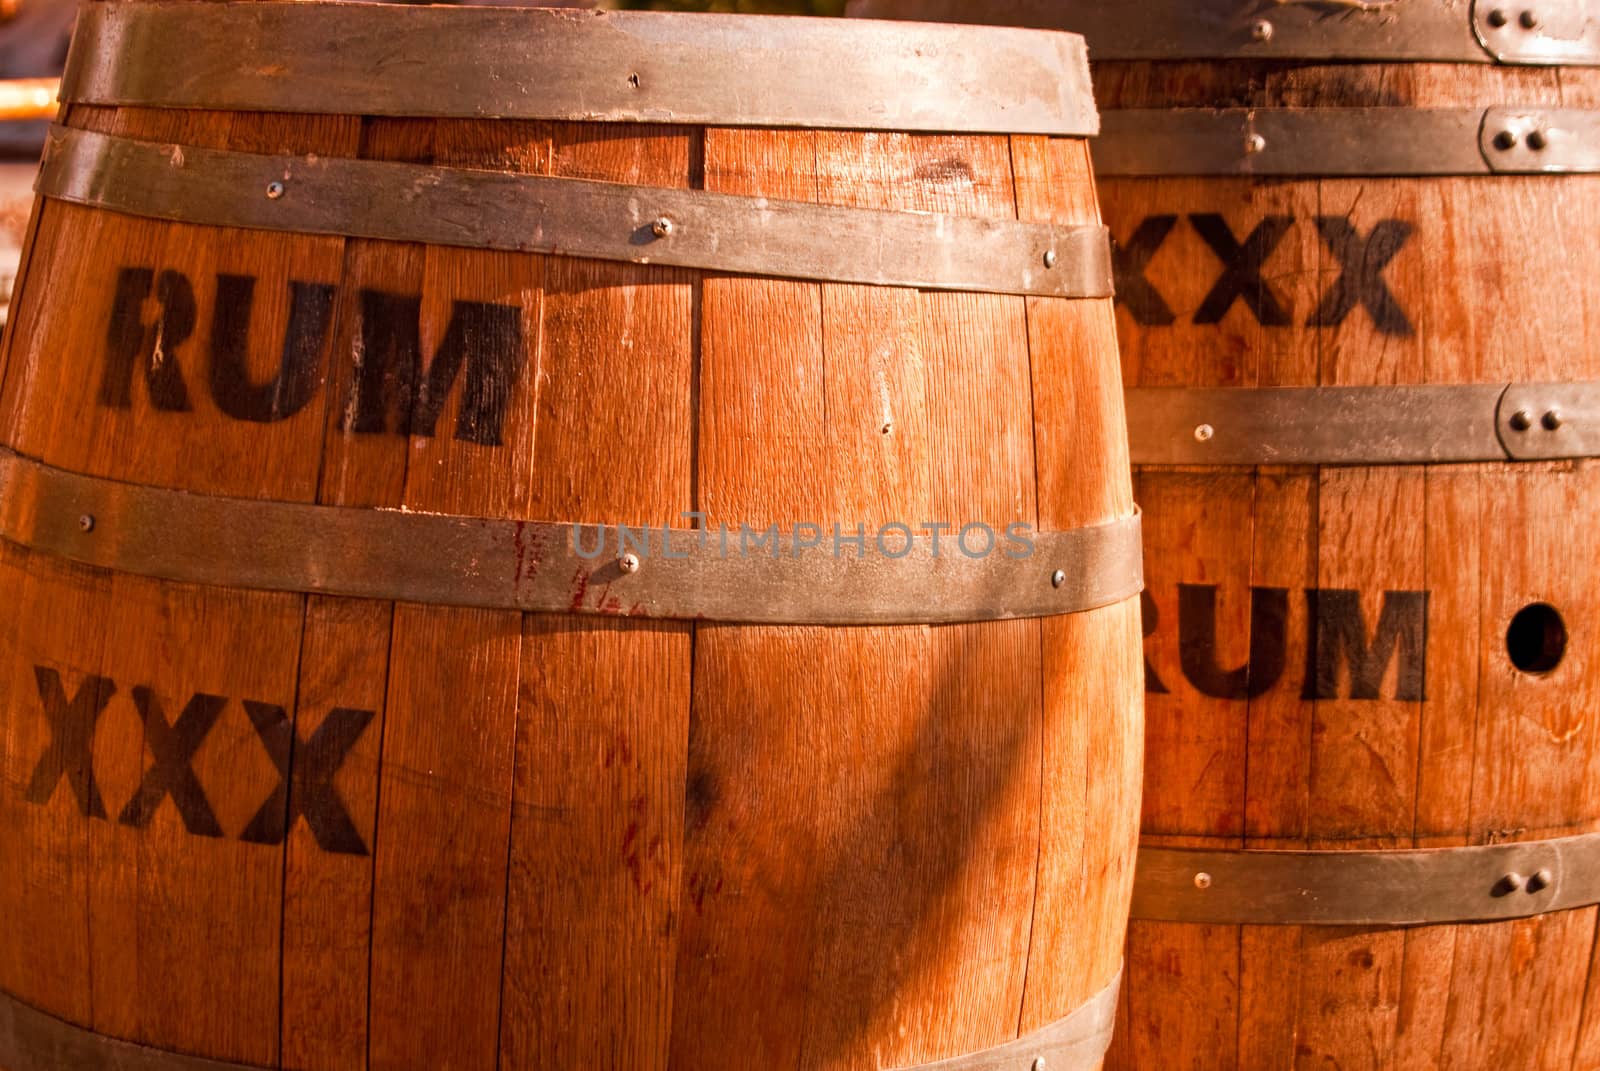 Wooden Rum kegs ringed with metal bands